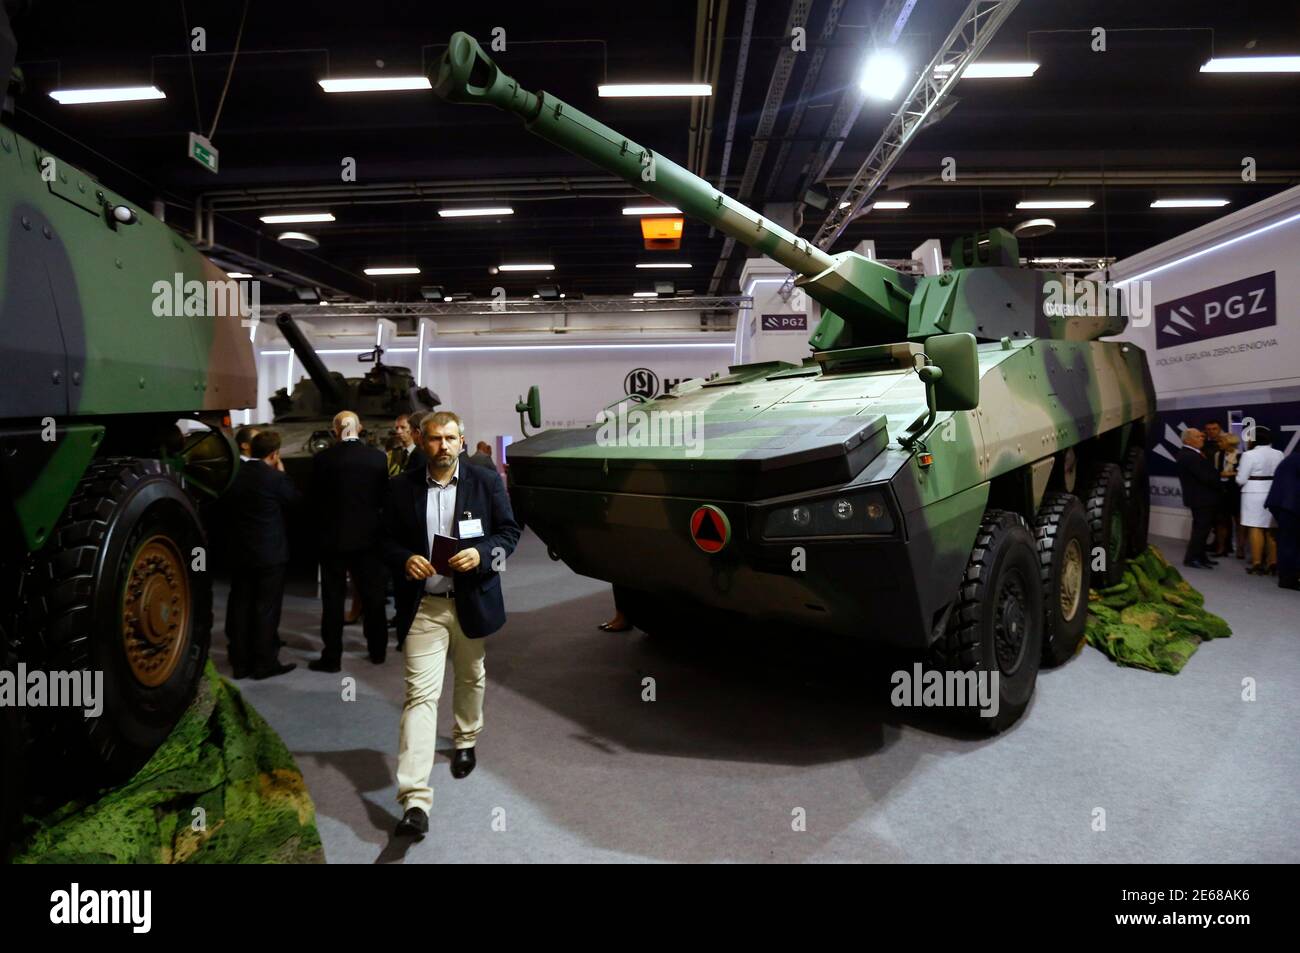 The Cockerill XC-8 105 hp low-weight concept-turret is seen on an armored modular vehicle at the stand of Huta Stalowa Wola (HSW), part of the Polish Armaments Group (PGZ), during an international military fair in Kielce, southern Poland September 2, 2014. Poland on Wednesday brought small defence manufacturers into a consortium big enough to bid, alongside foreign majors, for a share of the country's $40 billion military modernisation pot. The PGZ, set to comprise over 30 companies ranging from a shipyard to a high-tech graphene manufacturer, will allow the country's fragmented industry to co Stock Photo